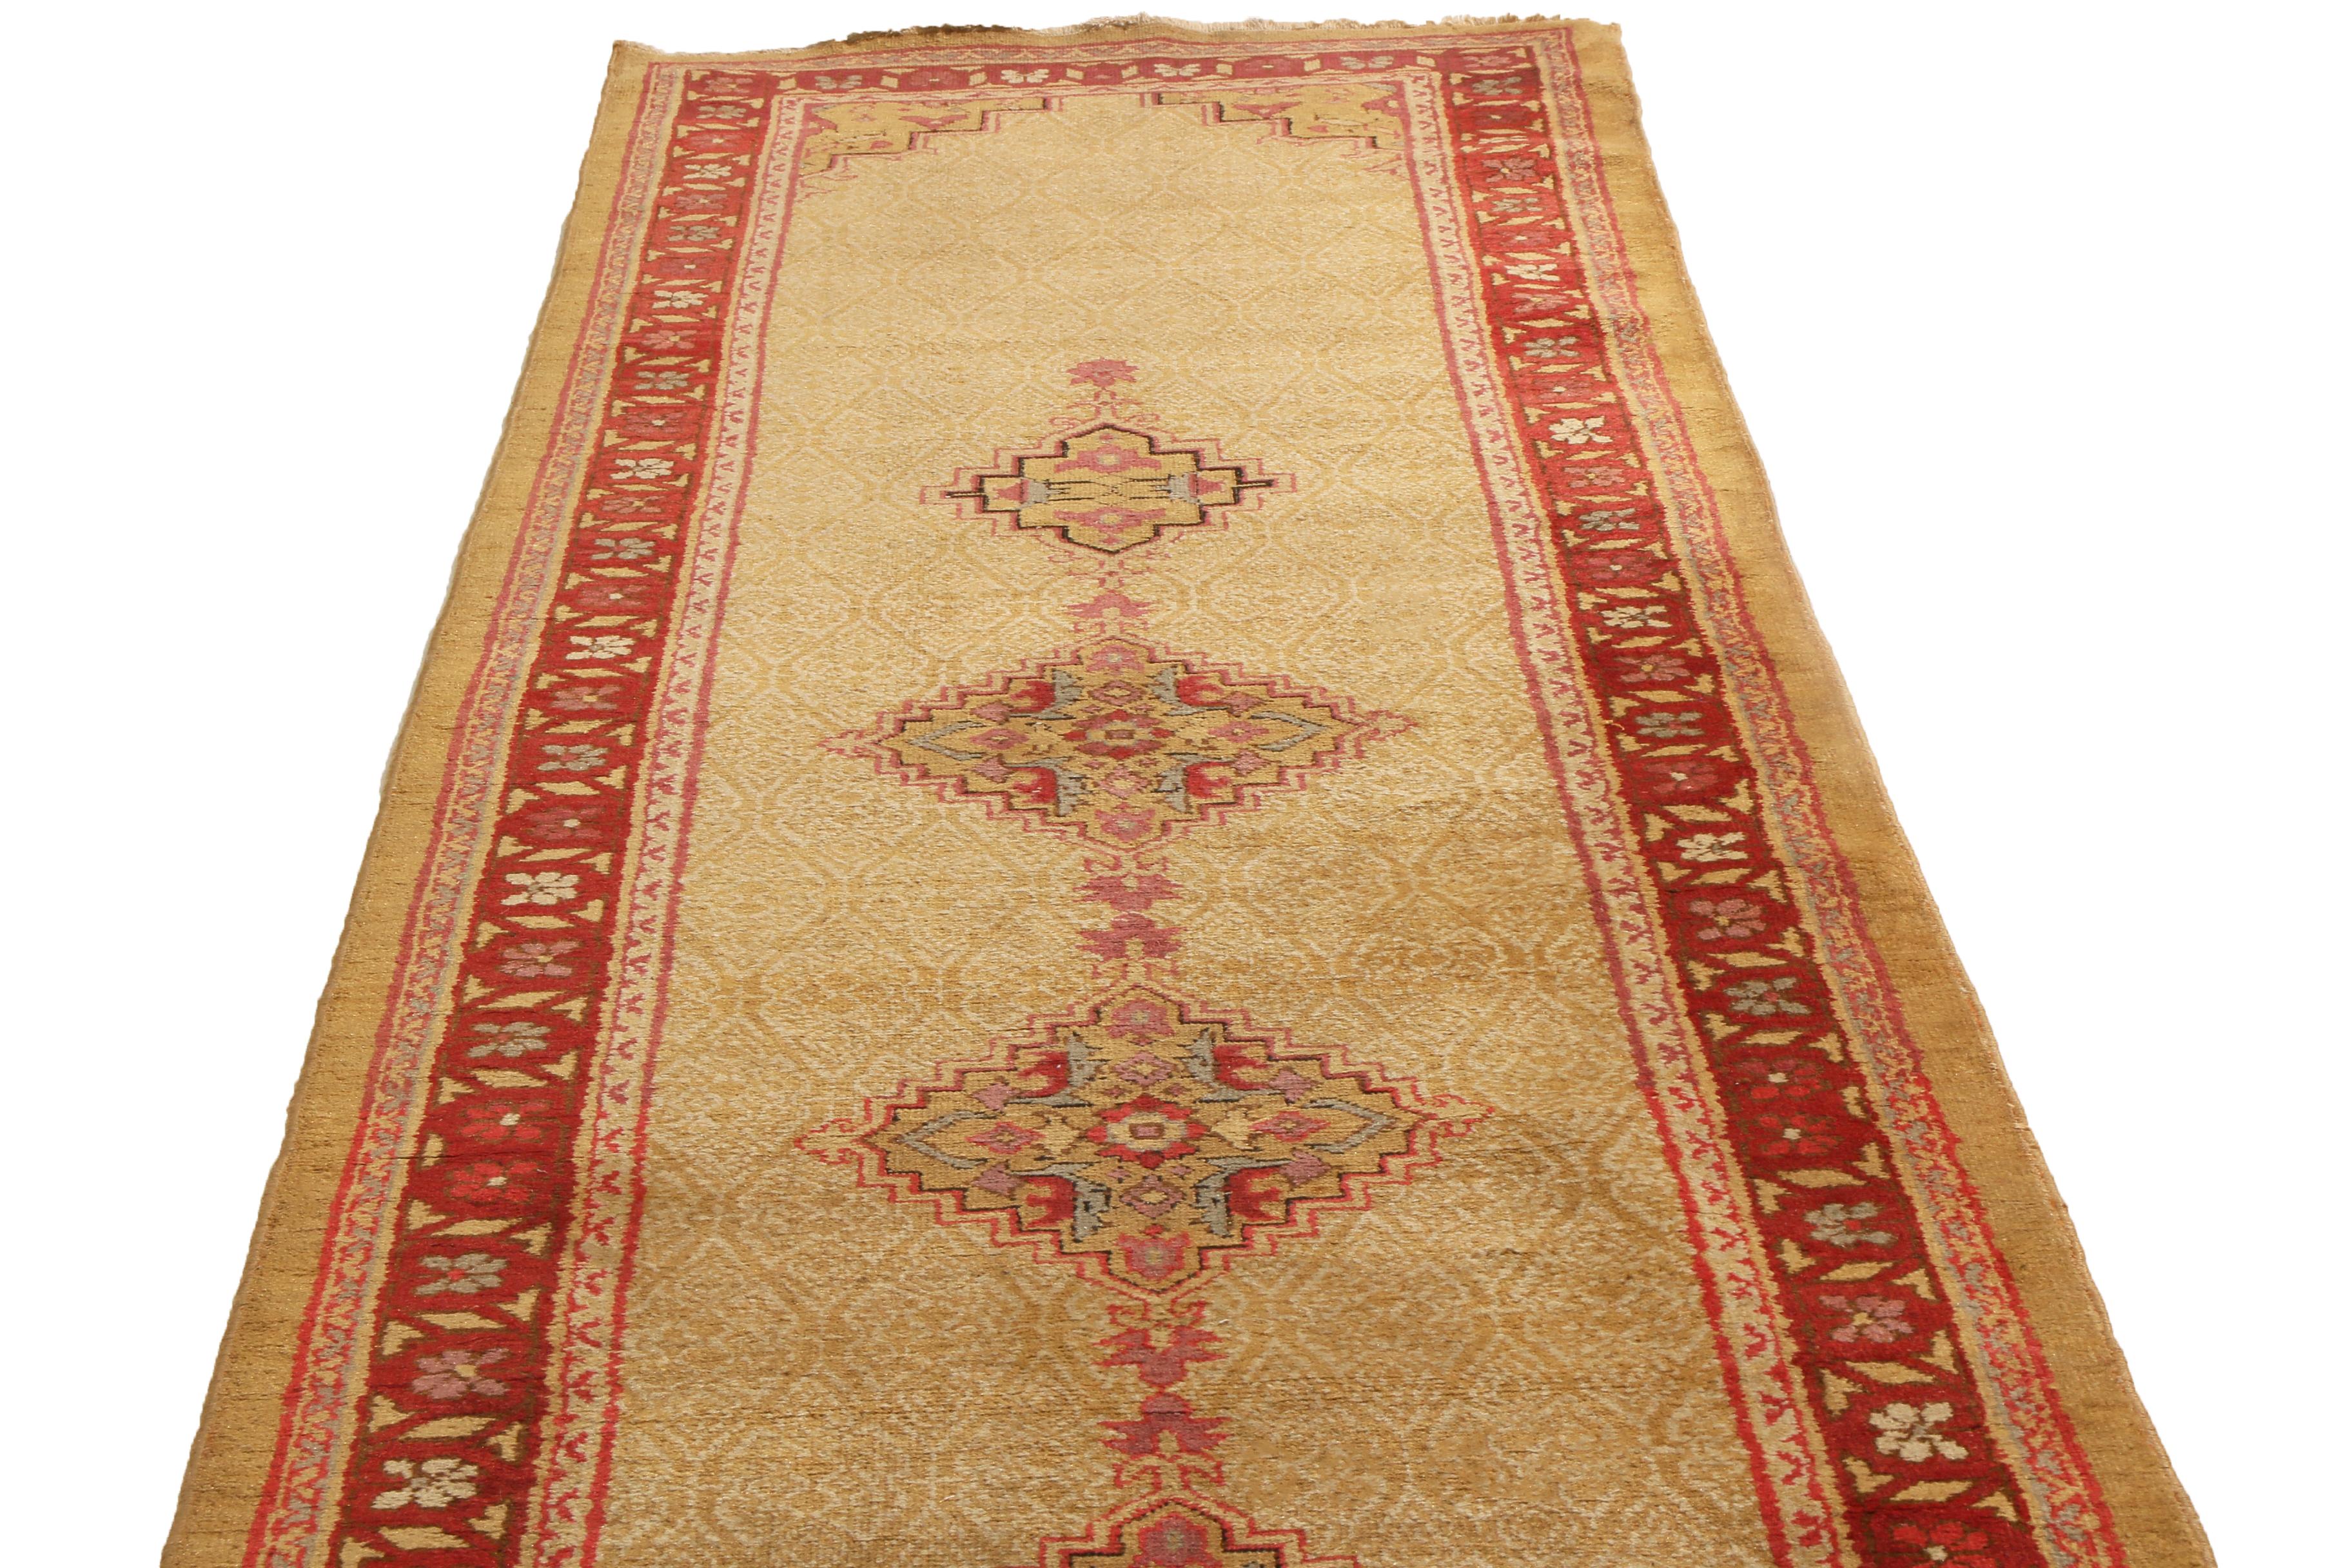 Originating from India in 1890, this antique Agra runner enjoys a rich central border in burgundy and blue color ways accenting the beige and pink field and medallions throughout. Hand knotted in a durable wool pile, the expansive medallion field